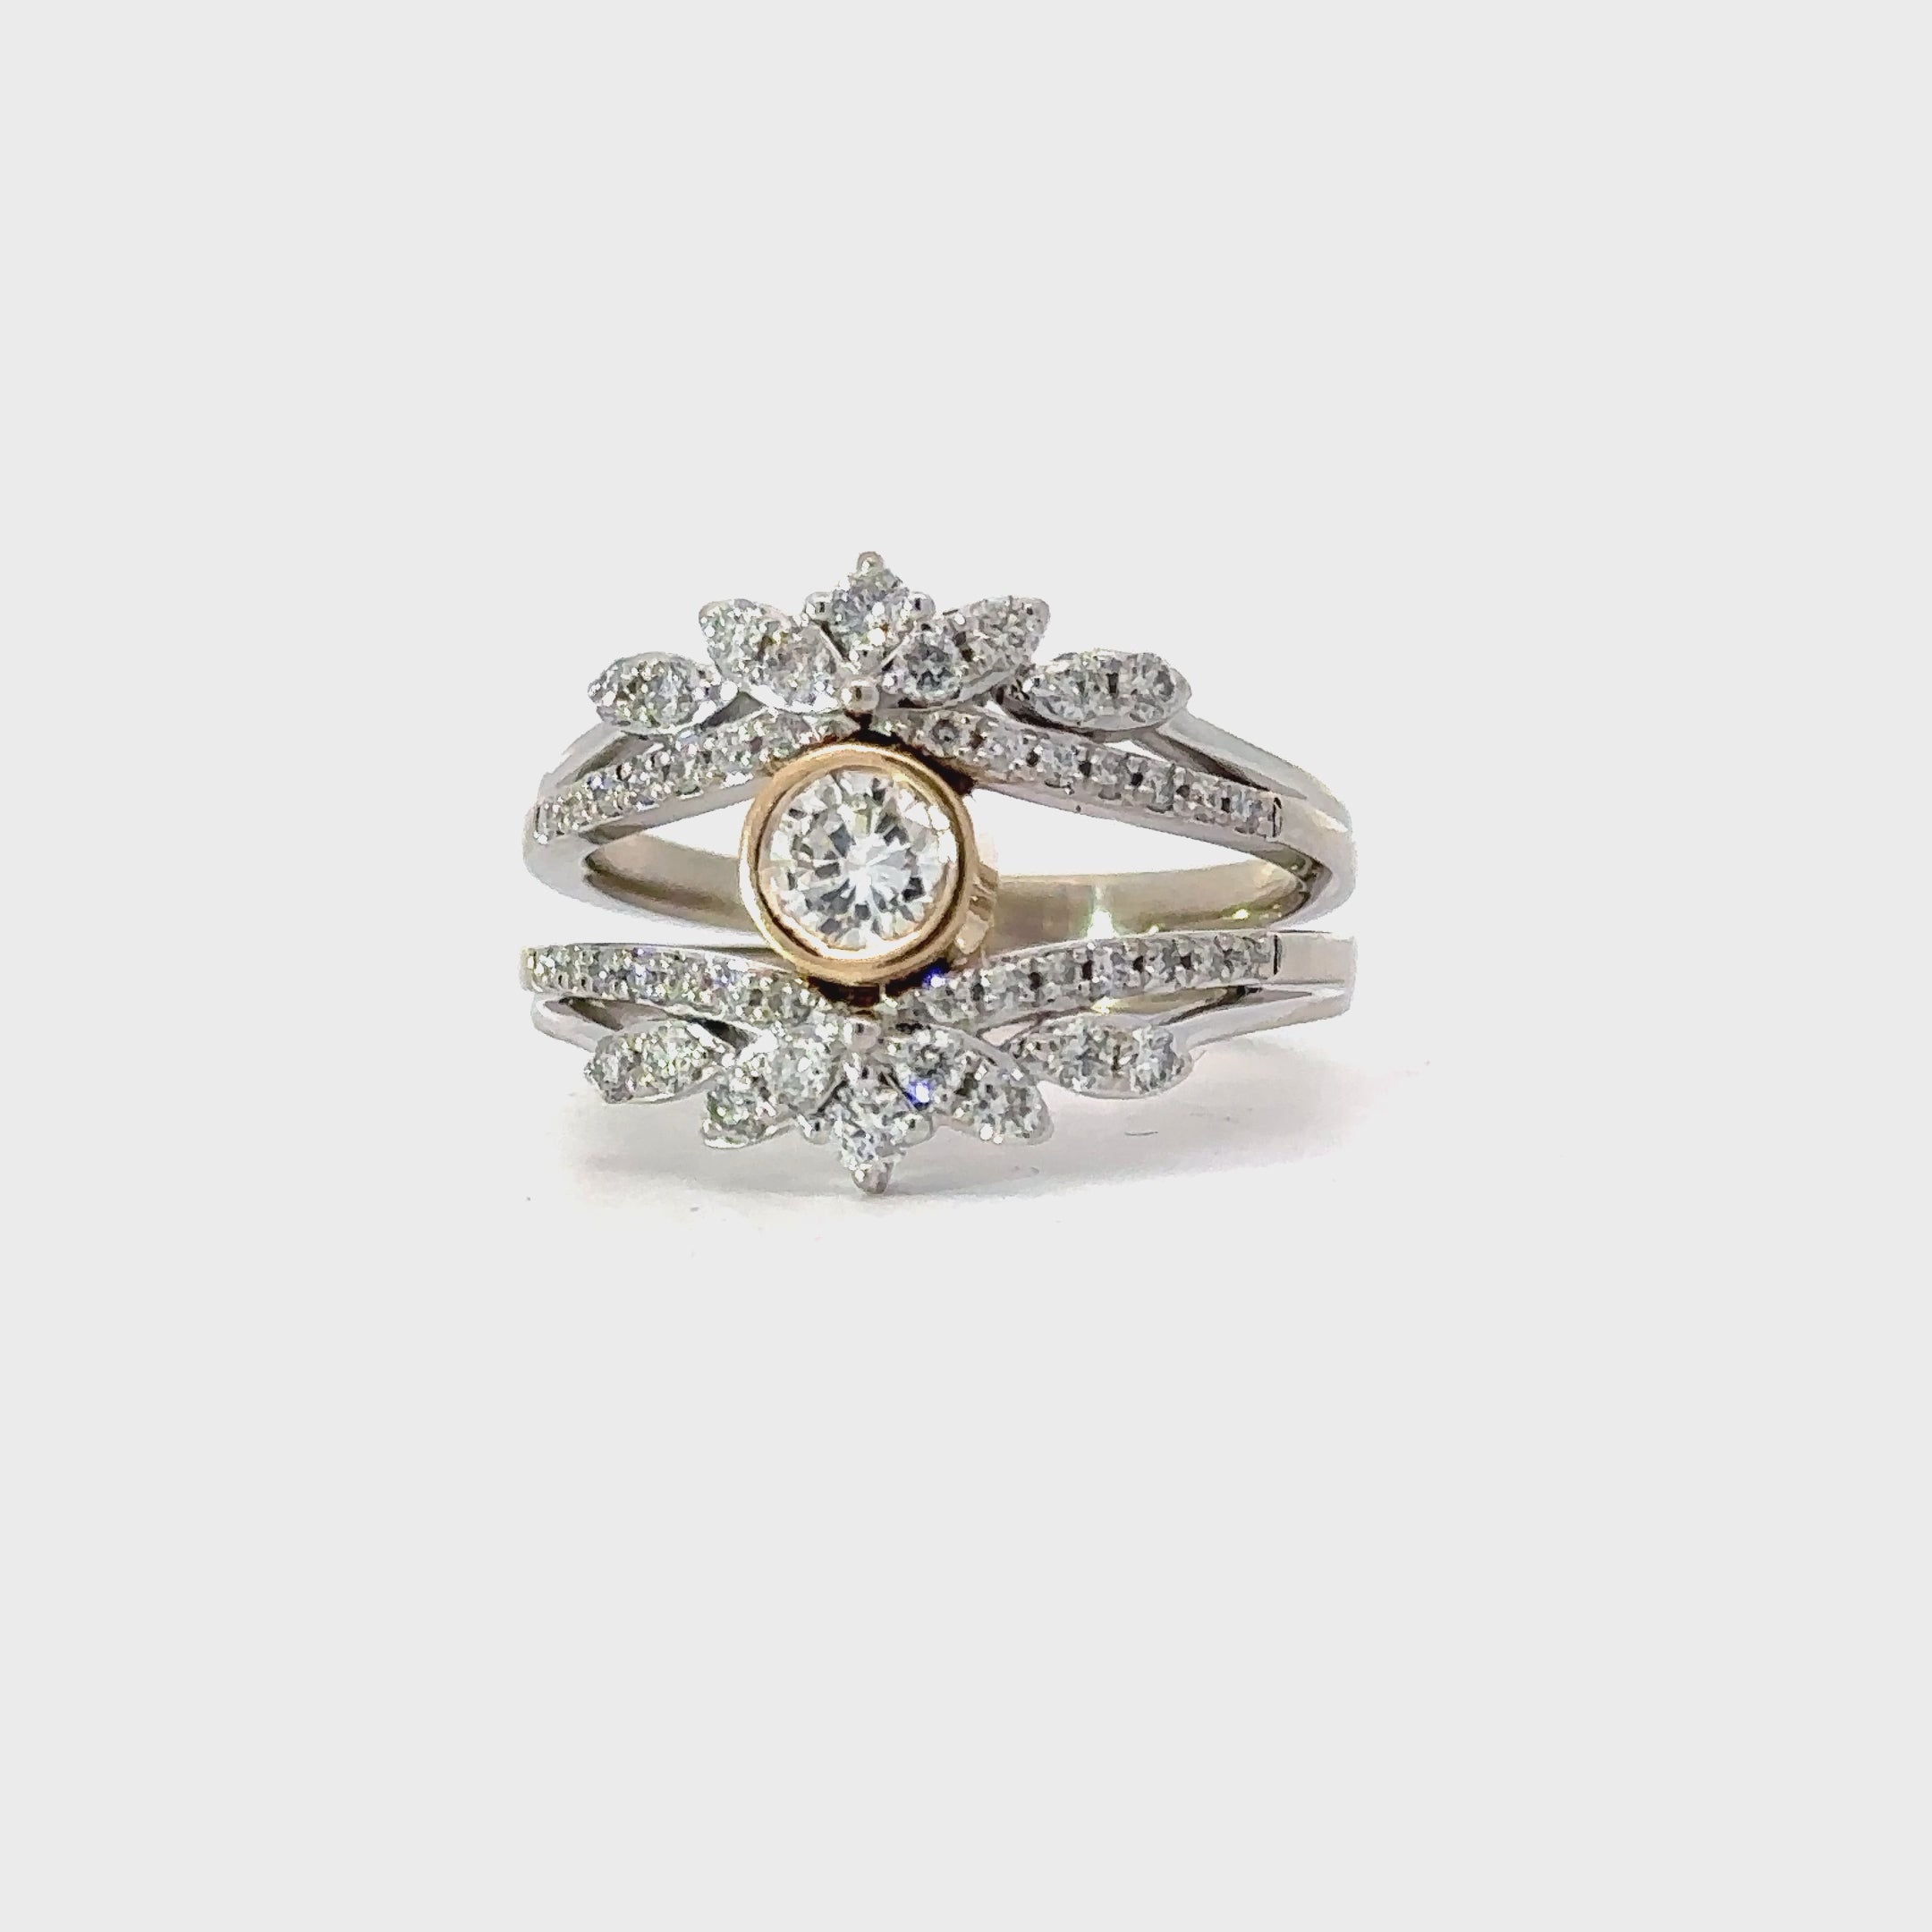 Vintage 10kw and 14k yellow gold diamond ring